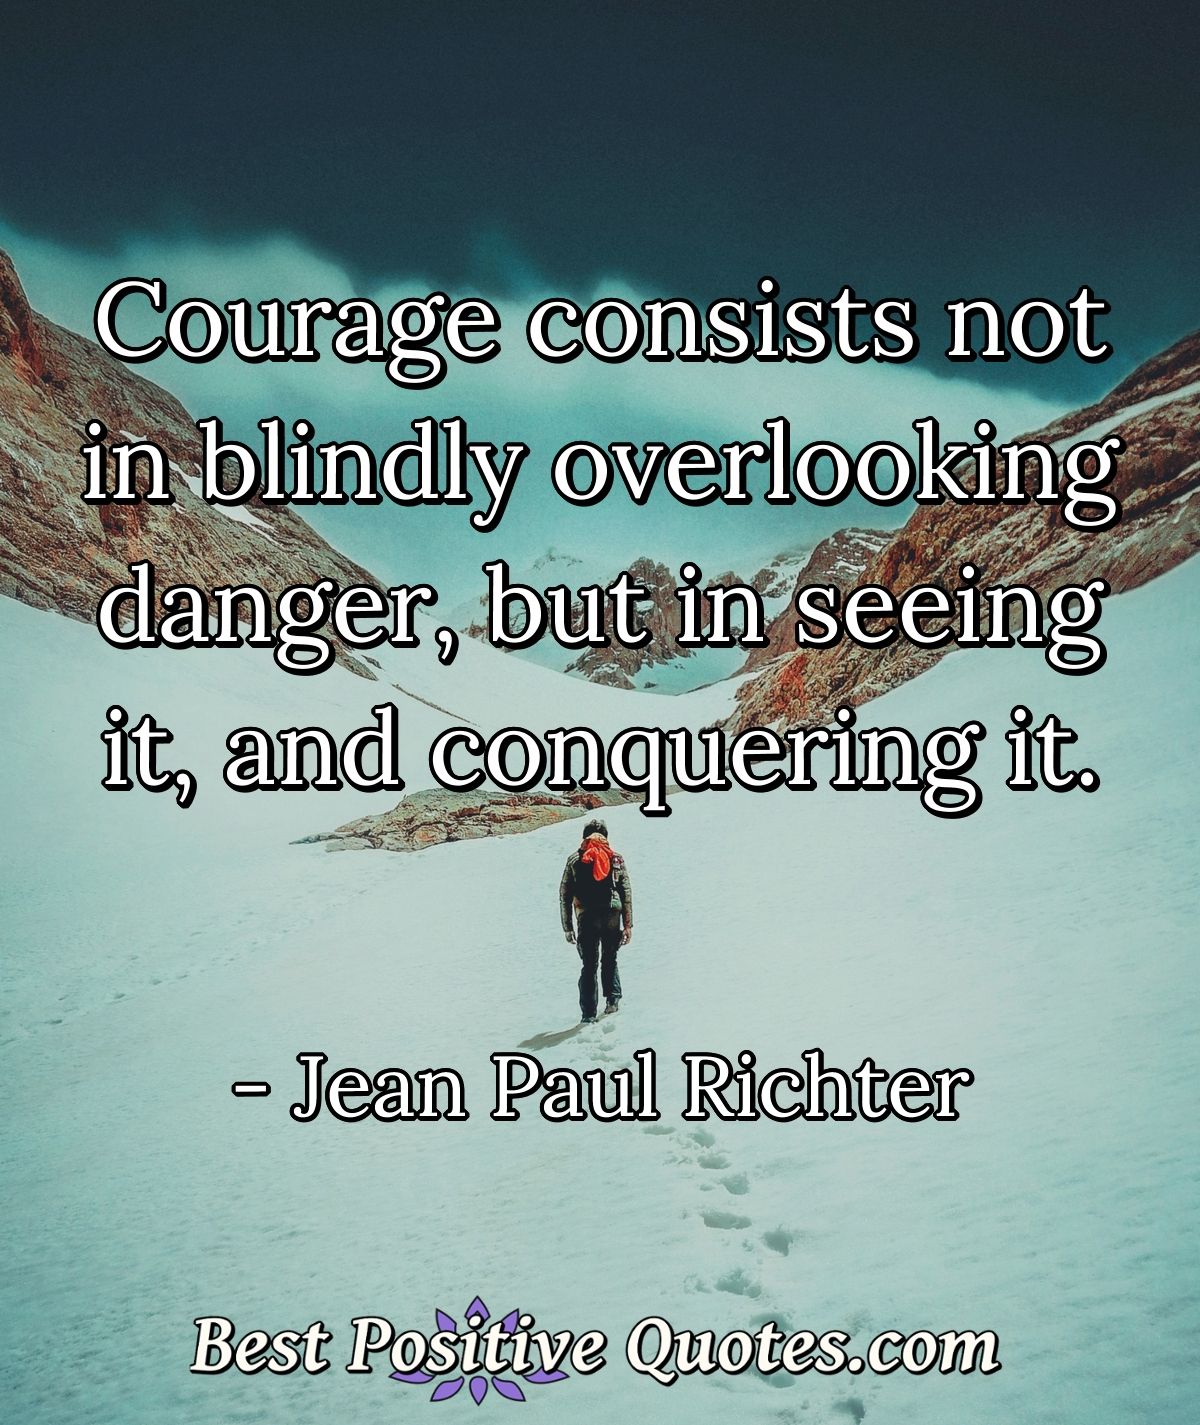 Courage consists not in blindly overlooking danger, but in seeing it, and conquering it. - Jean Paul Richter